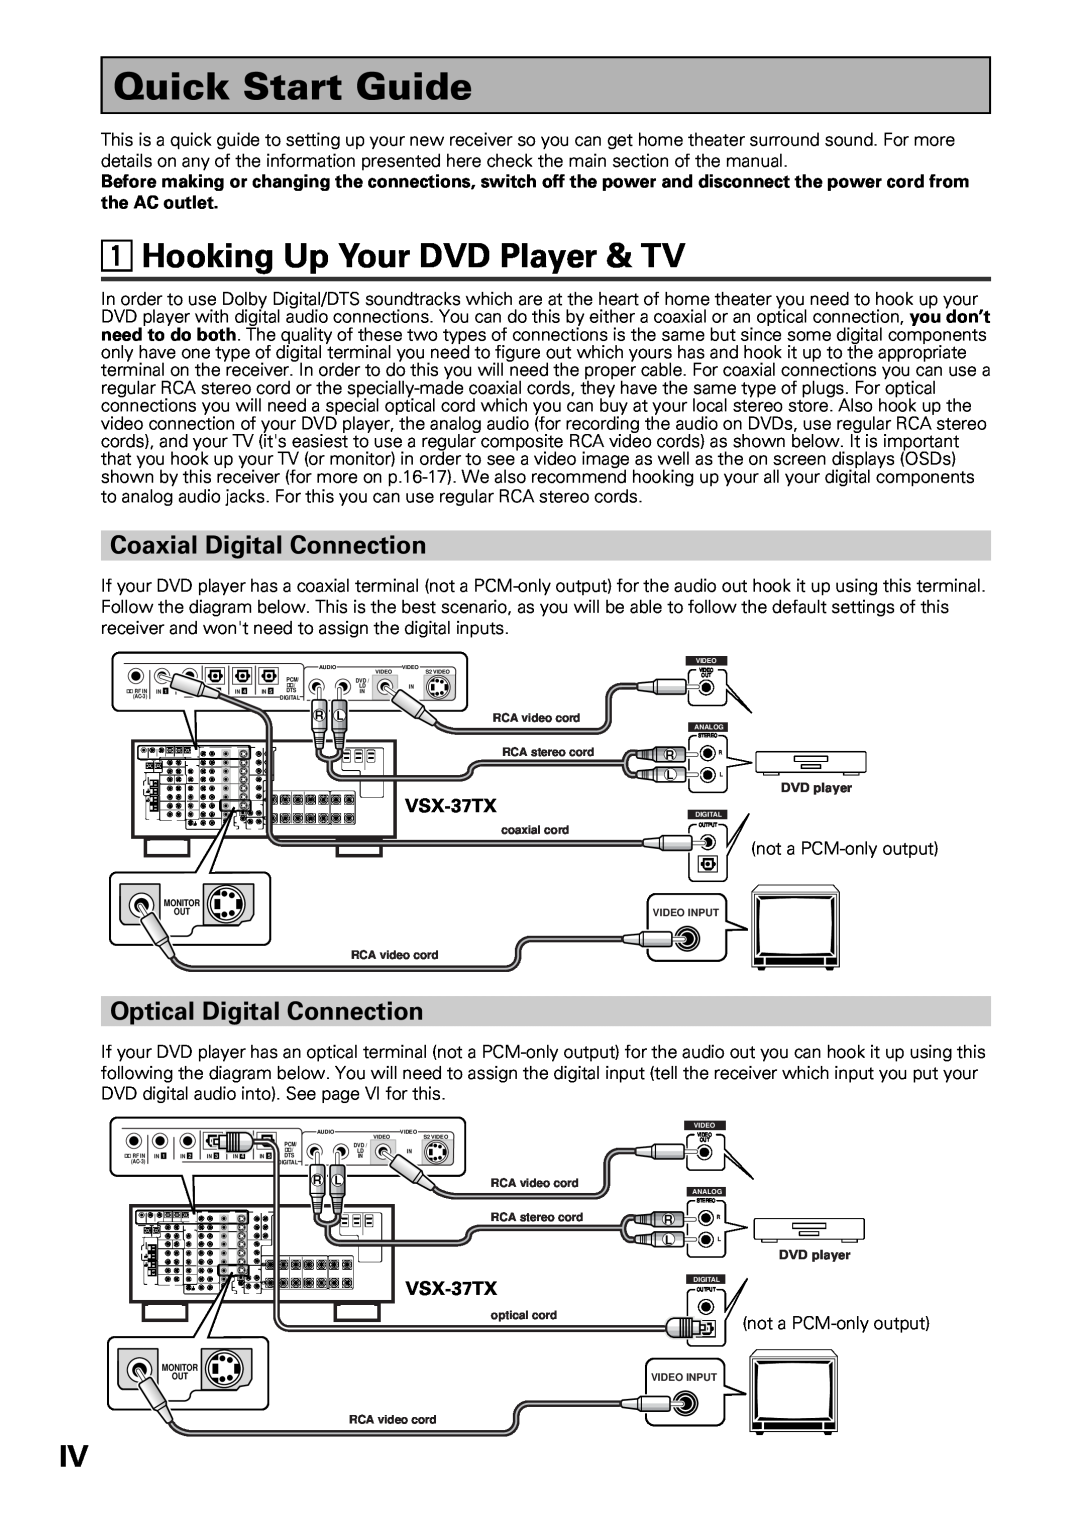 Pioneer VSX-36TX manual Quick Start Guide, 1Hooking Up Your DVD Player & TV, Coaxial Digital Connection, VSX-37TX 